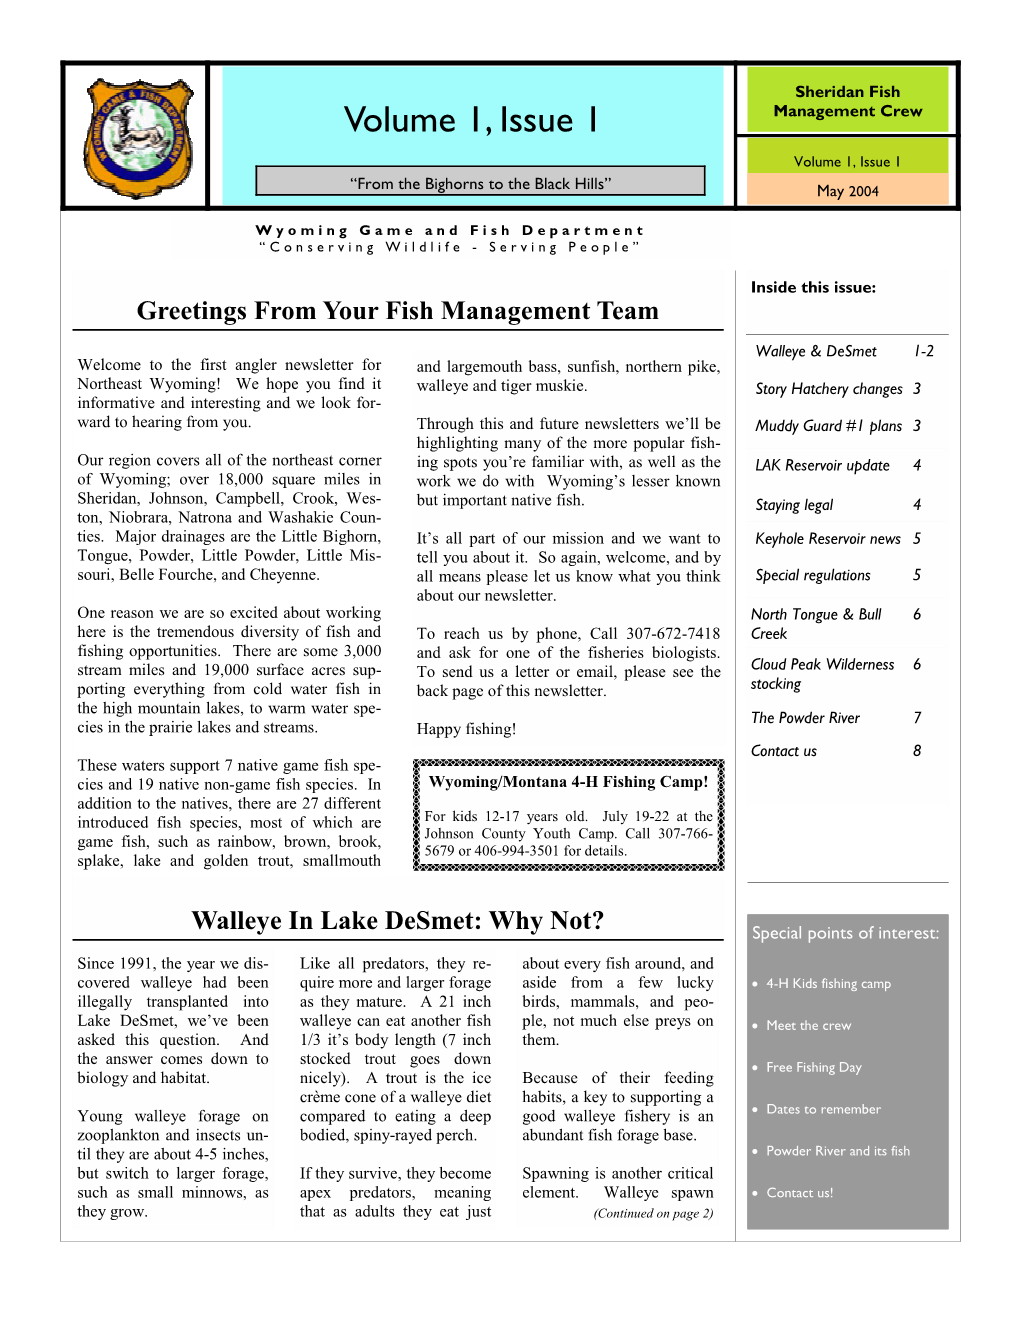 Volume 1, Issue 1 Management Crew Volume 1, Issue 1 “From the Bighorns to the Black Hills” May 2004